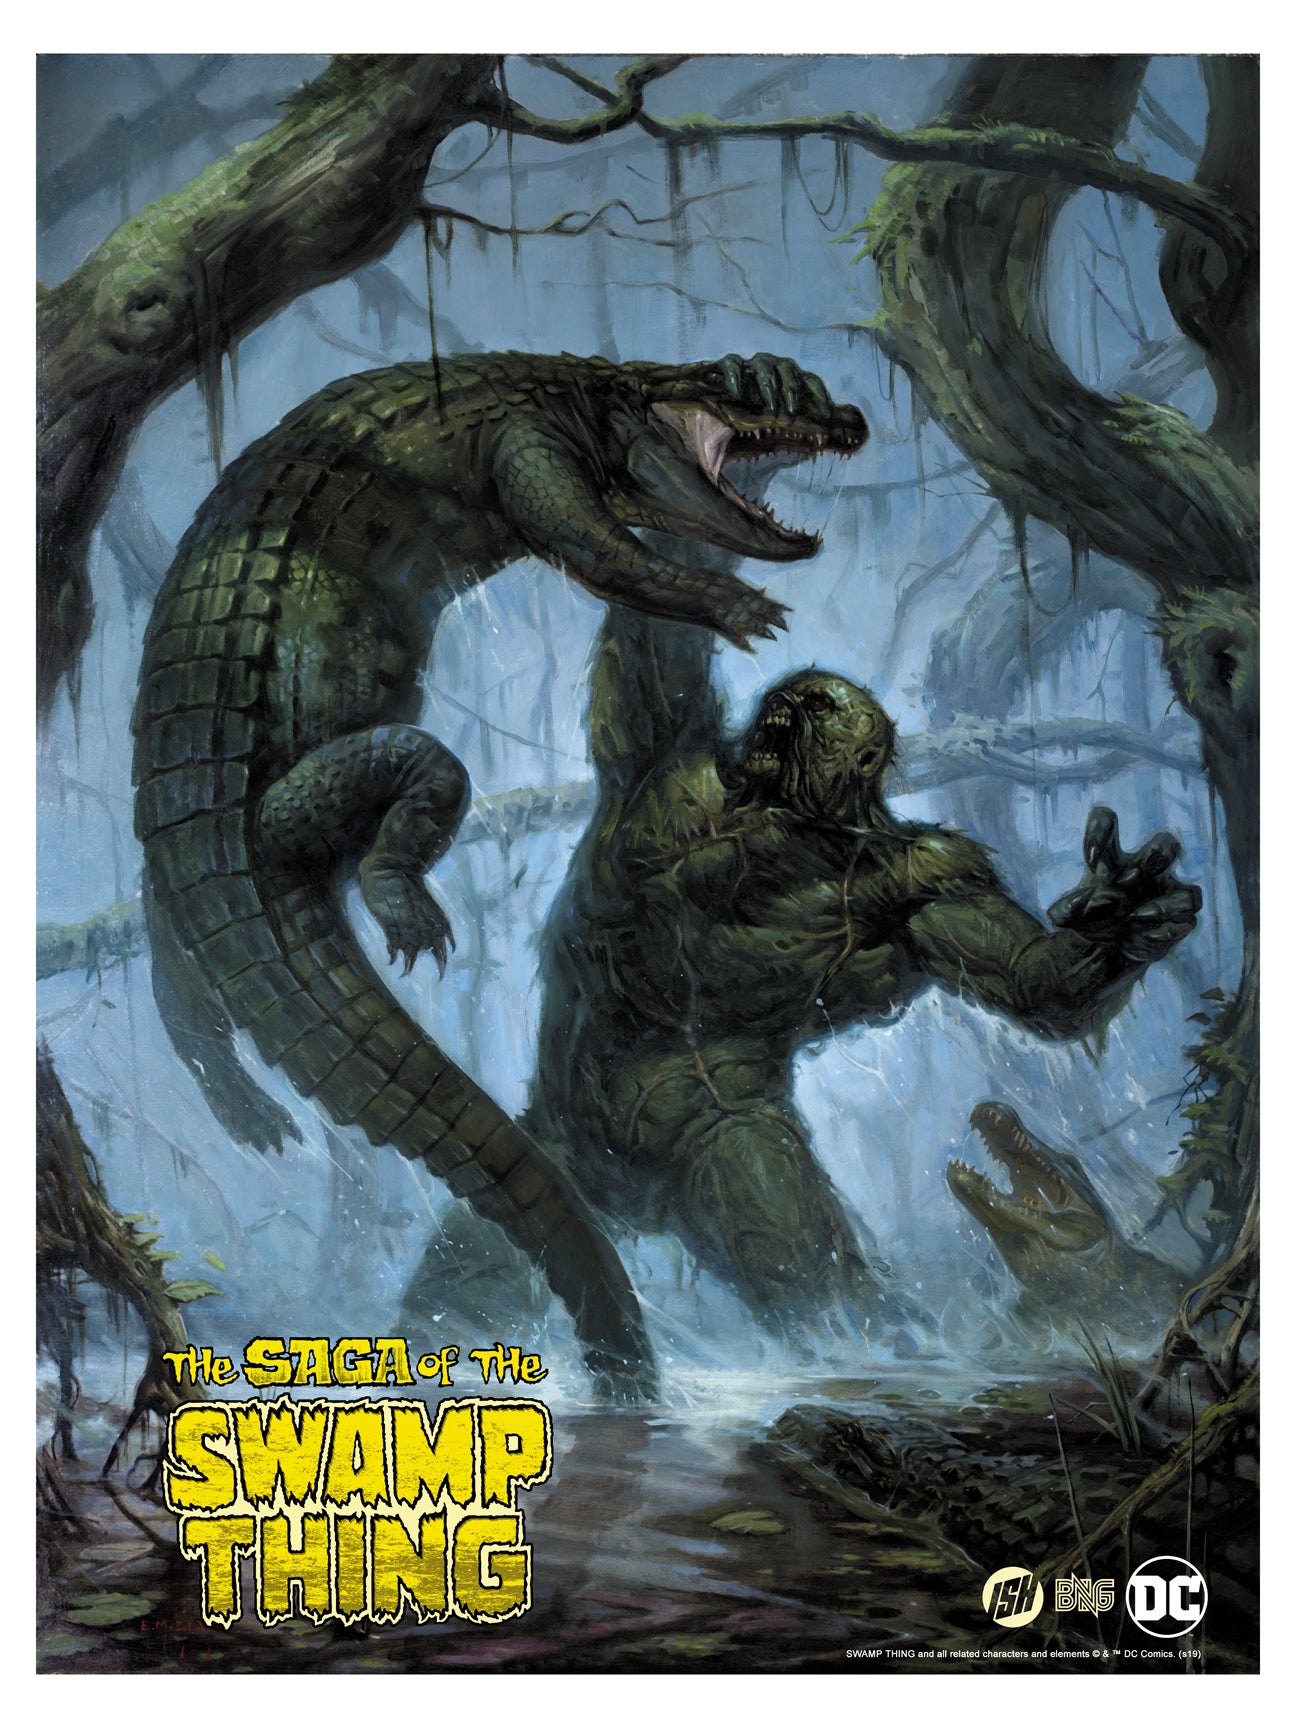 E.M. Gist "Swamp Thing" Titled Edition